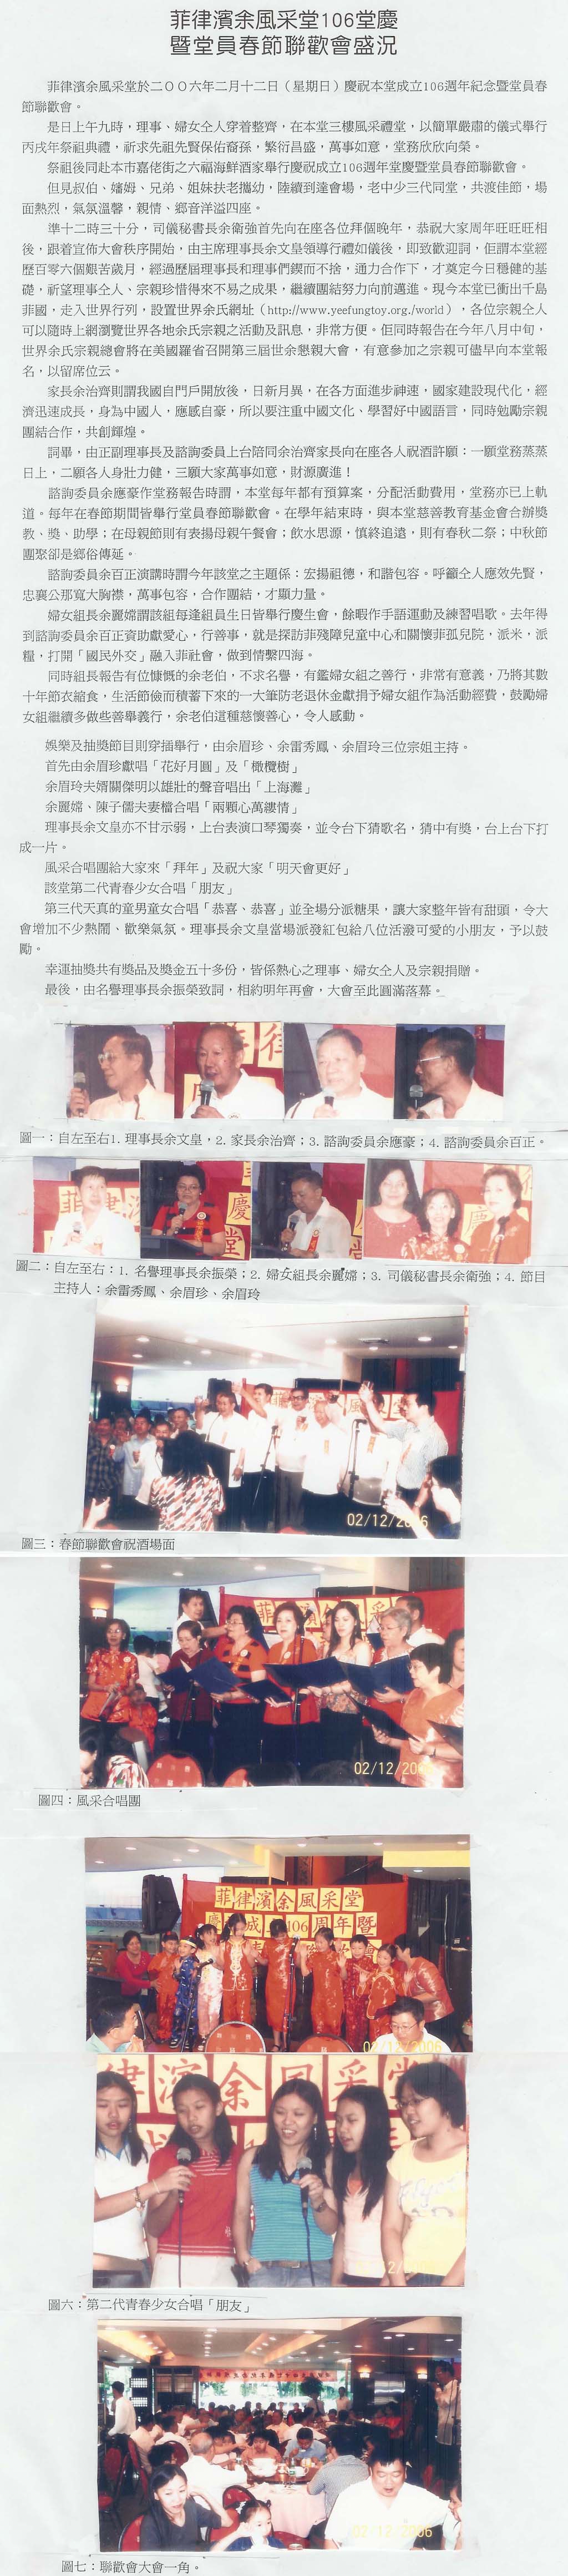 Chinse text of 106th anniv. and spring banquet